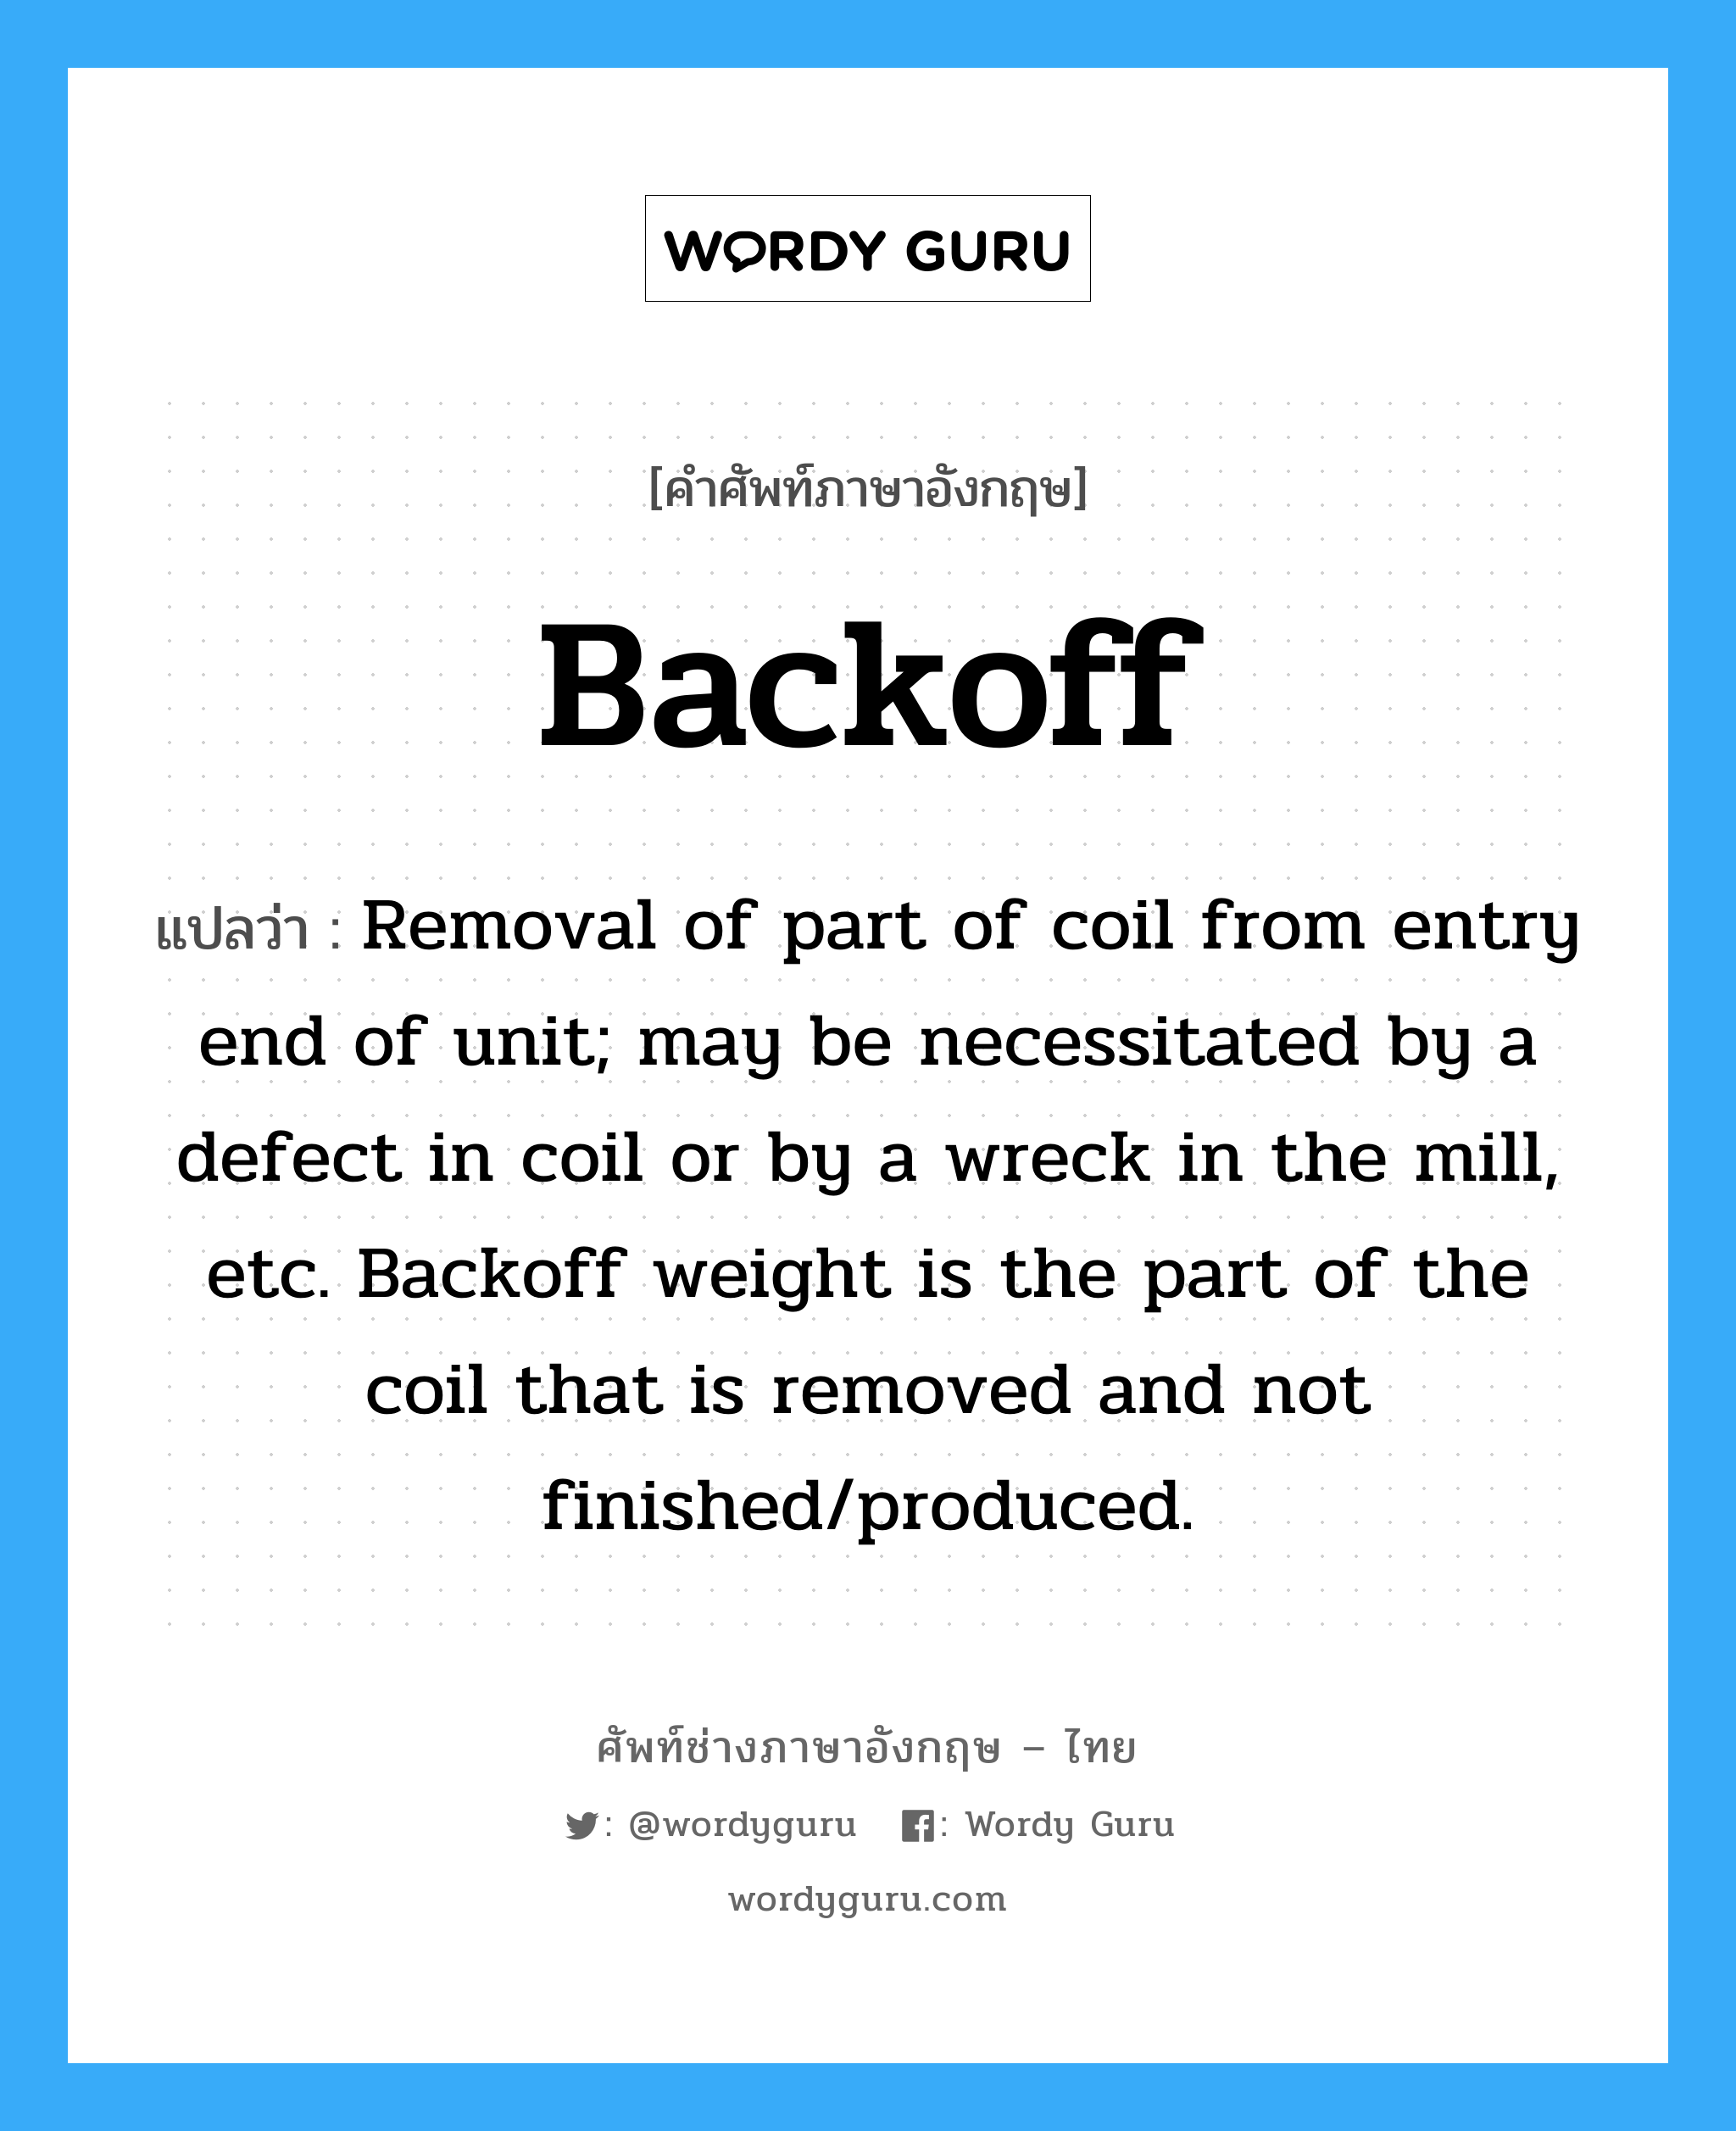 Backoff แปลว่า?, คำศัพท์ช่างภาษาอังกฤษ - ไทย Backoff คำศัพท์ภาษาอังกฤษ Backoff แปลว่า Removal of part of coil from entry end of unit; may be necessitated by a defect in coil or by a wreck in the mill, etc. Backoff weight is the part of the coil that is removed and not finished/produced.